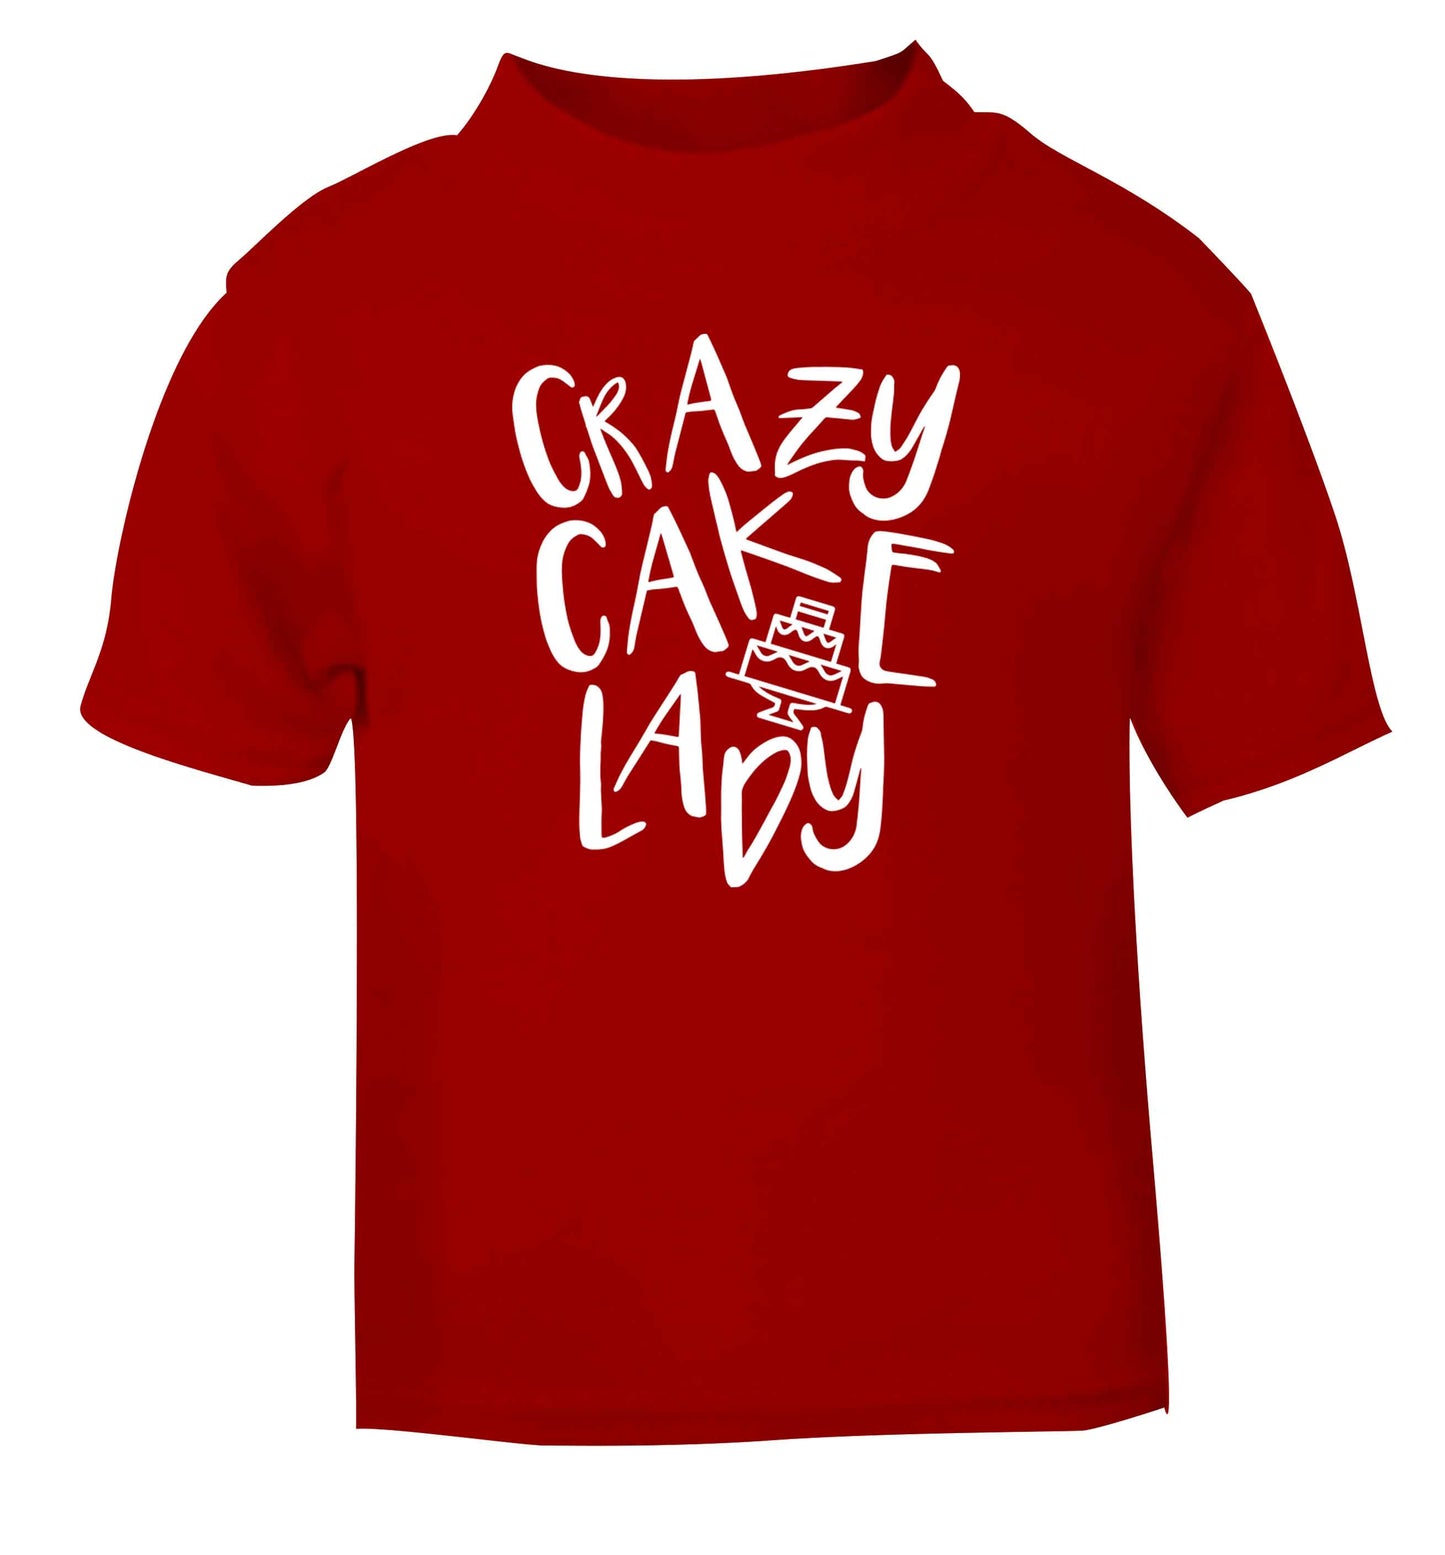 Crazy cake lady red Baby Toddler Tshirt 2 Years